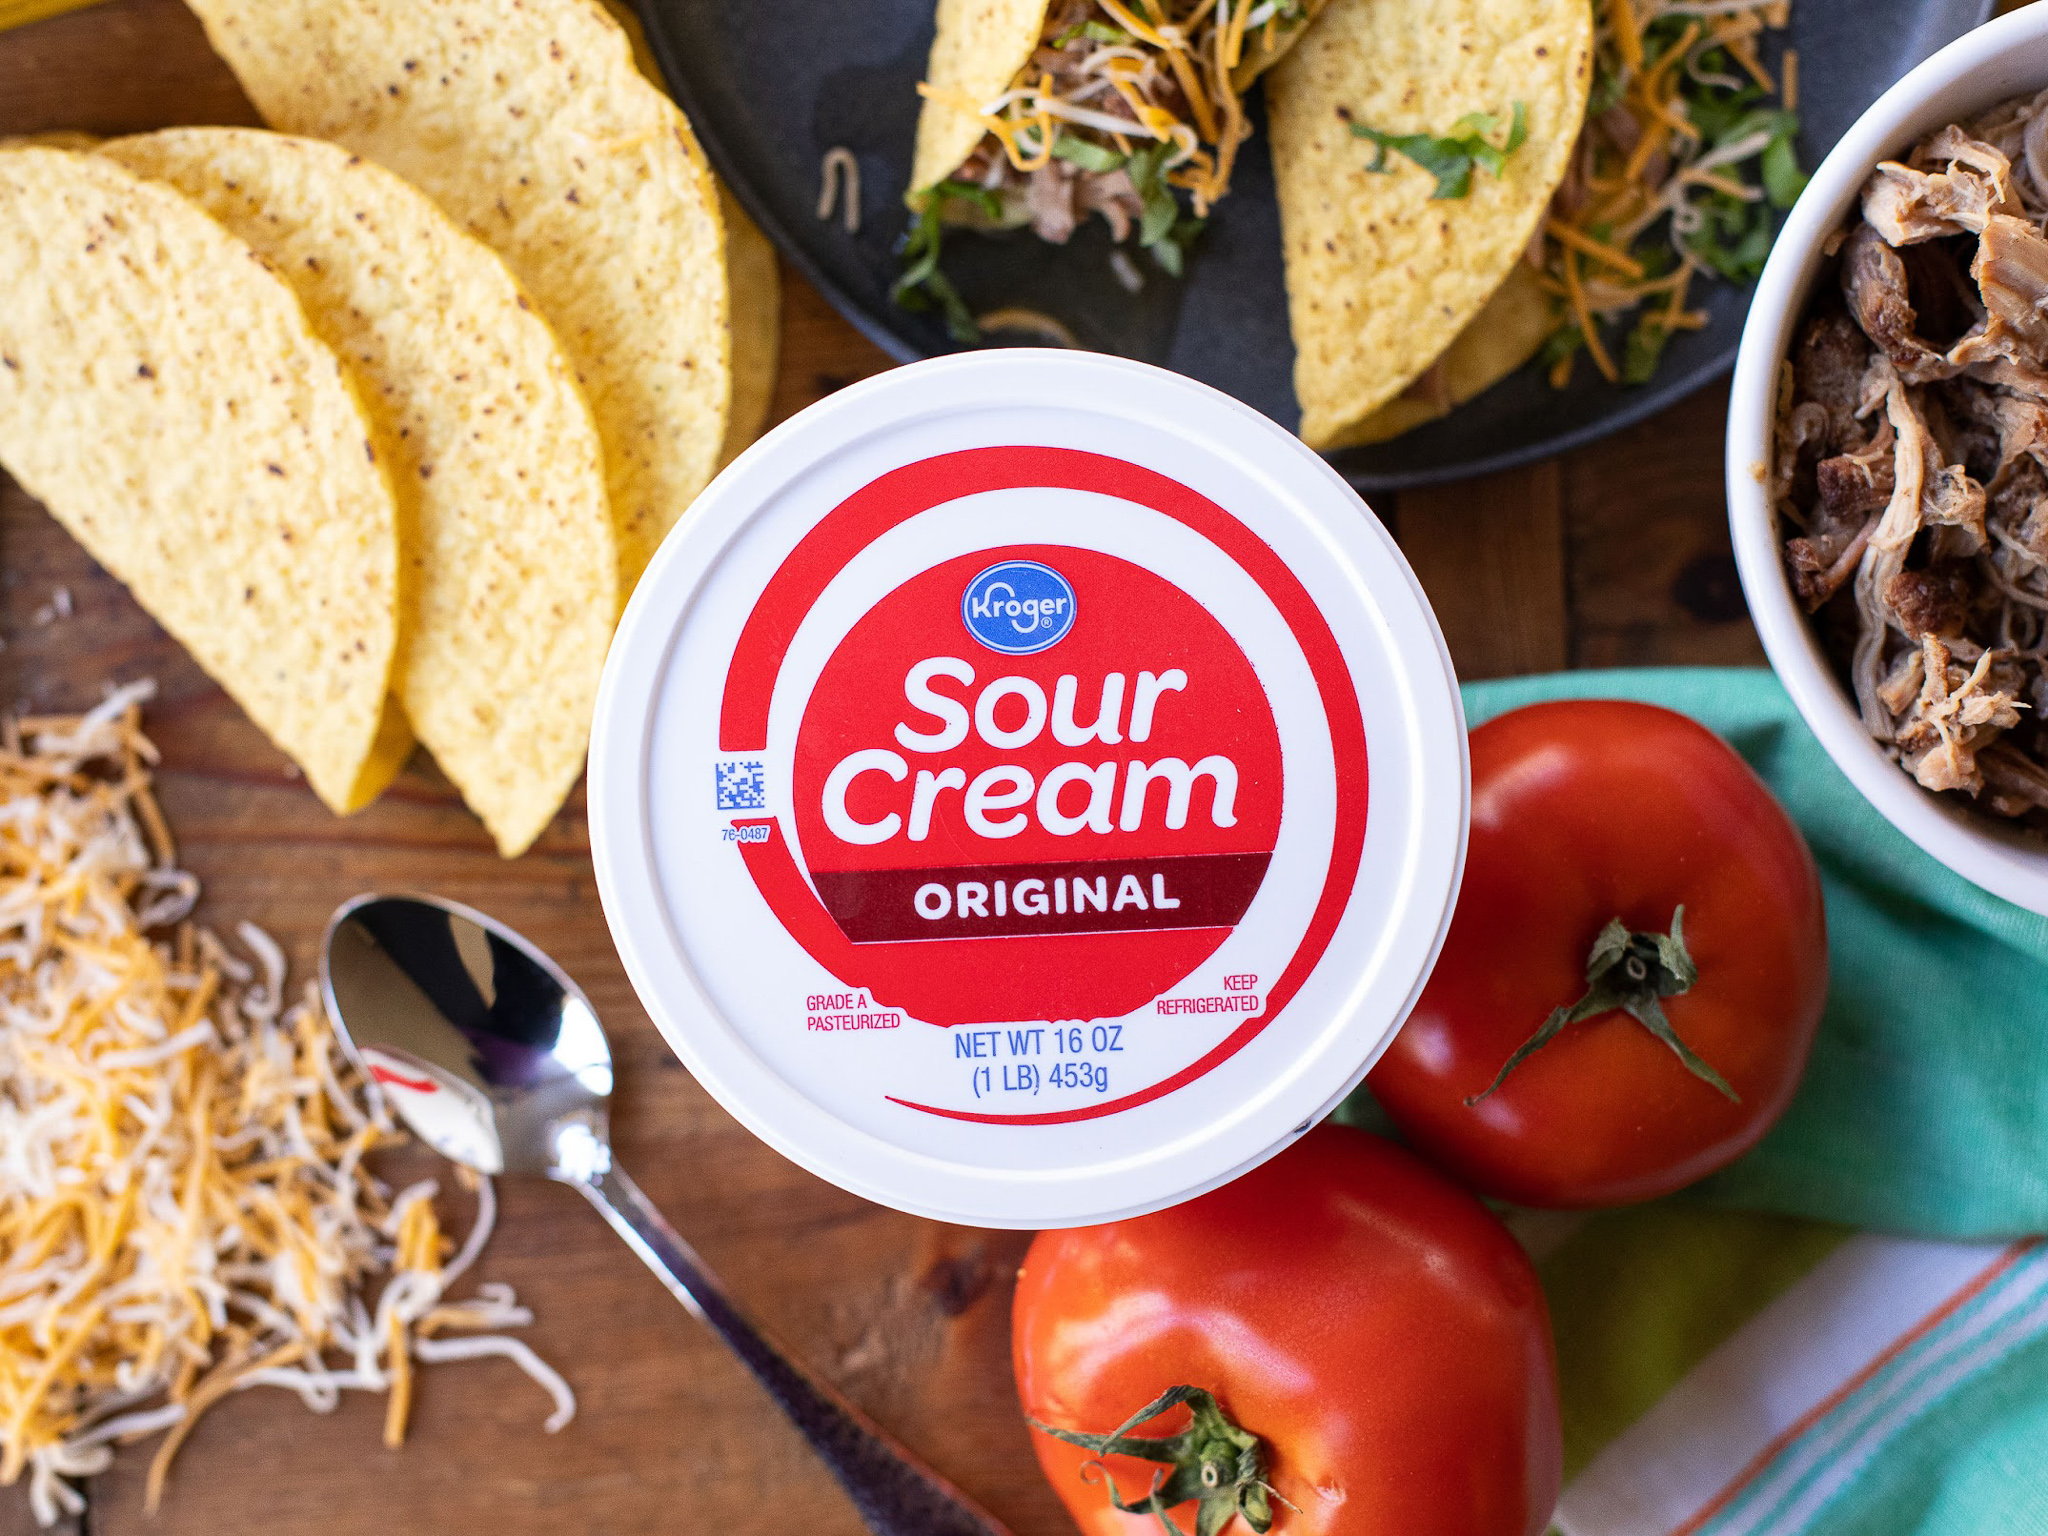 Score Kroger Brand Sour Cream, Dips, Or Cottage Cheese For Just $1.49 This  Week - iHeartKroger